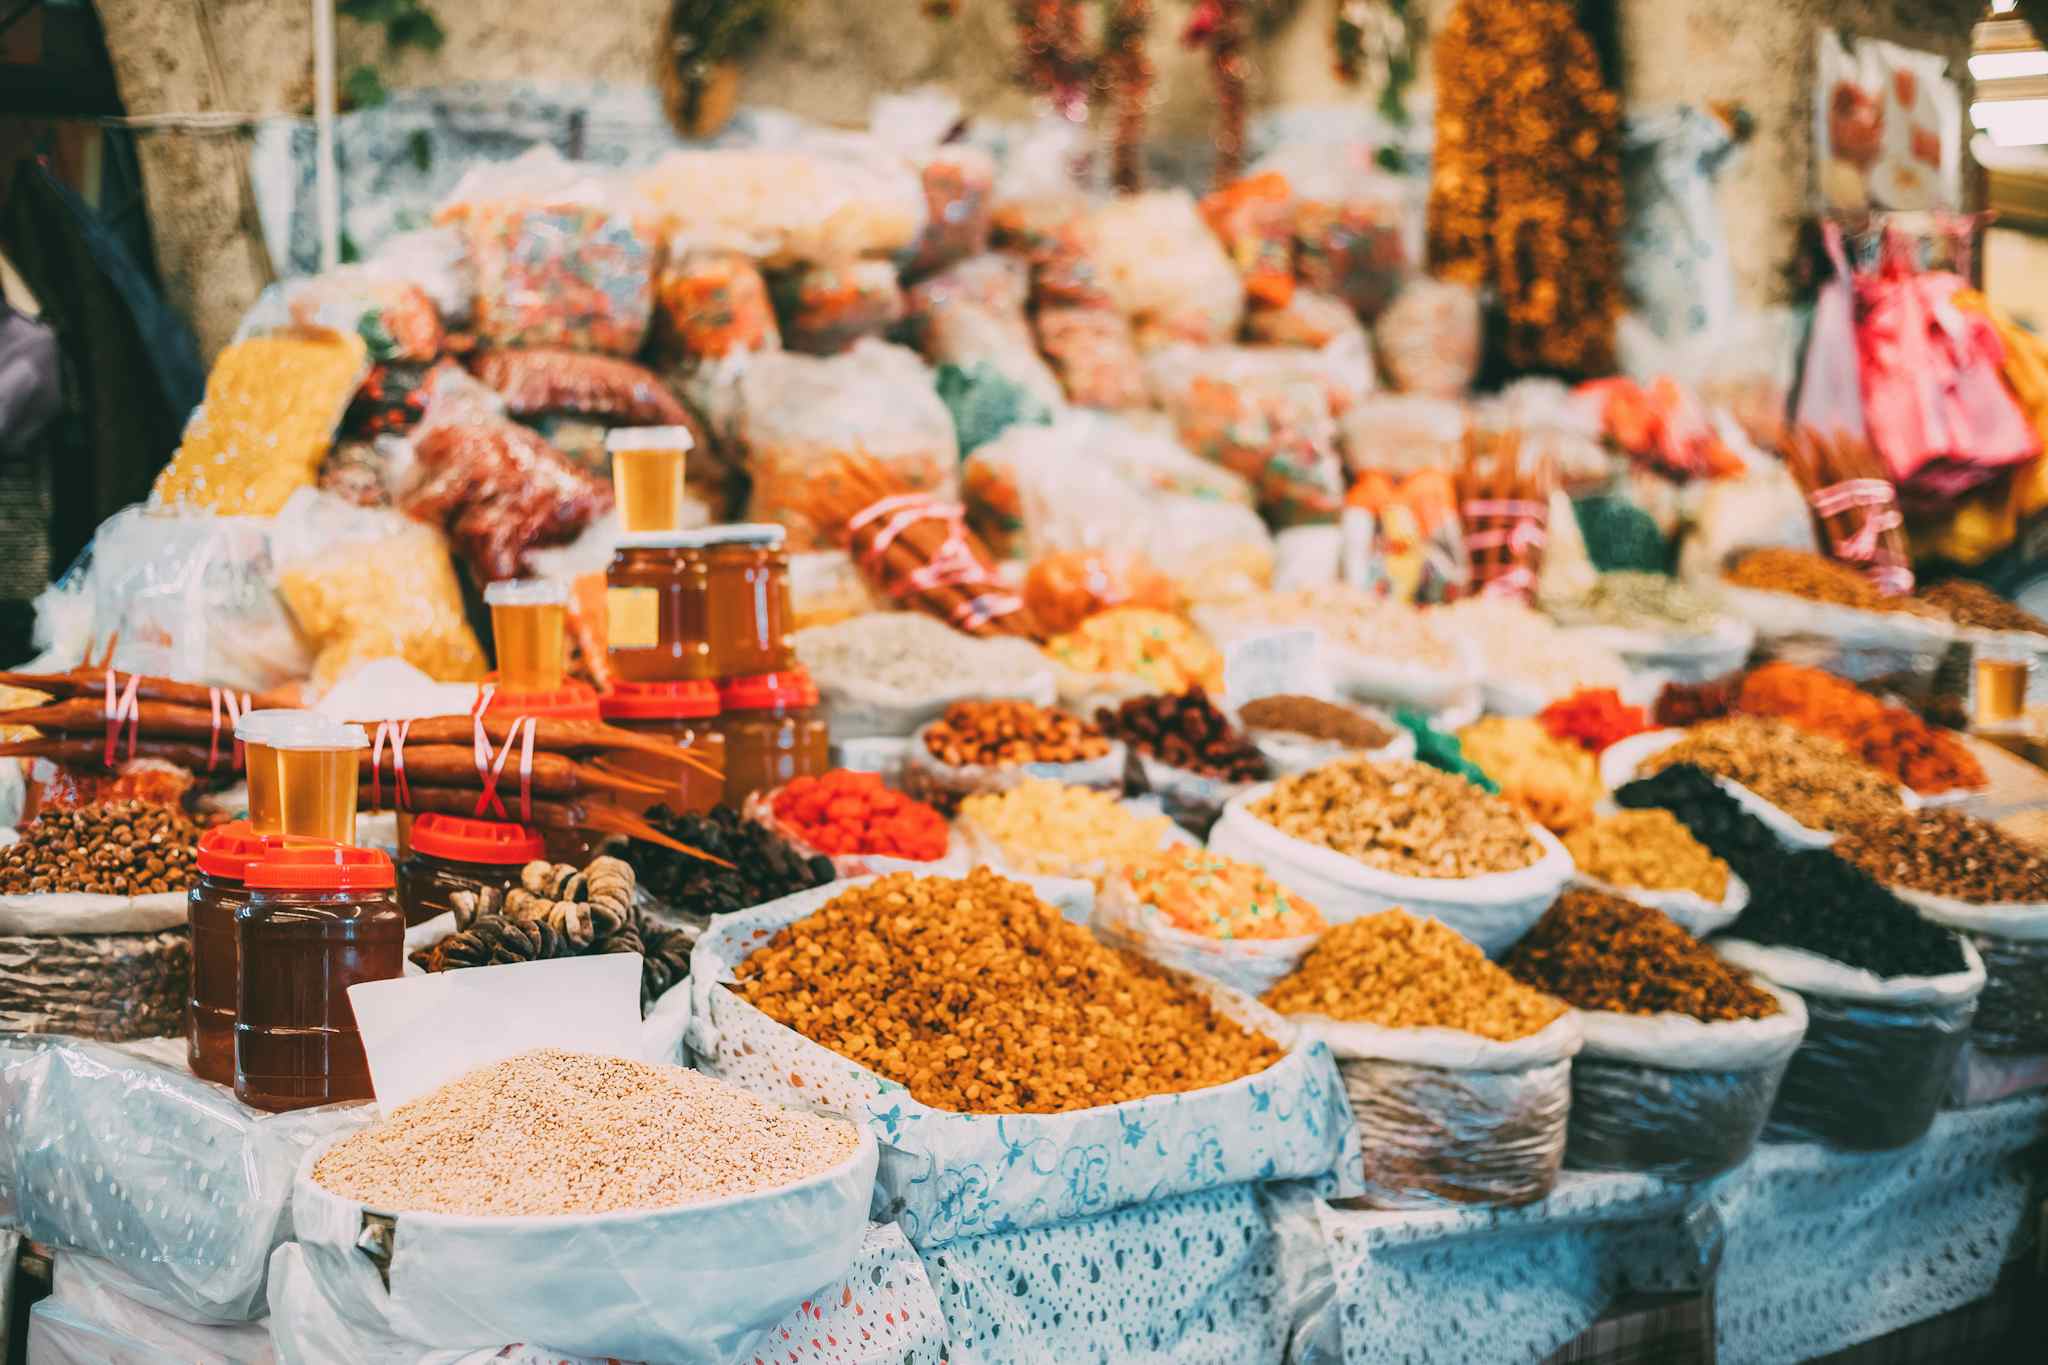 Tbilisi markets, Georgia. Photo: GettyImages-887710698